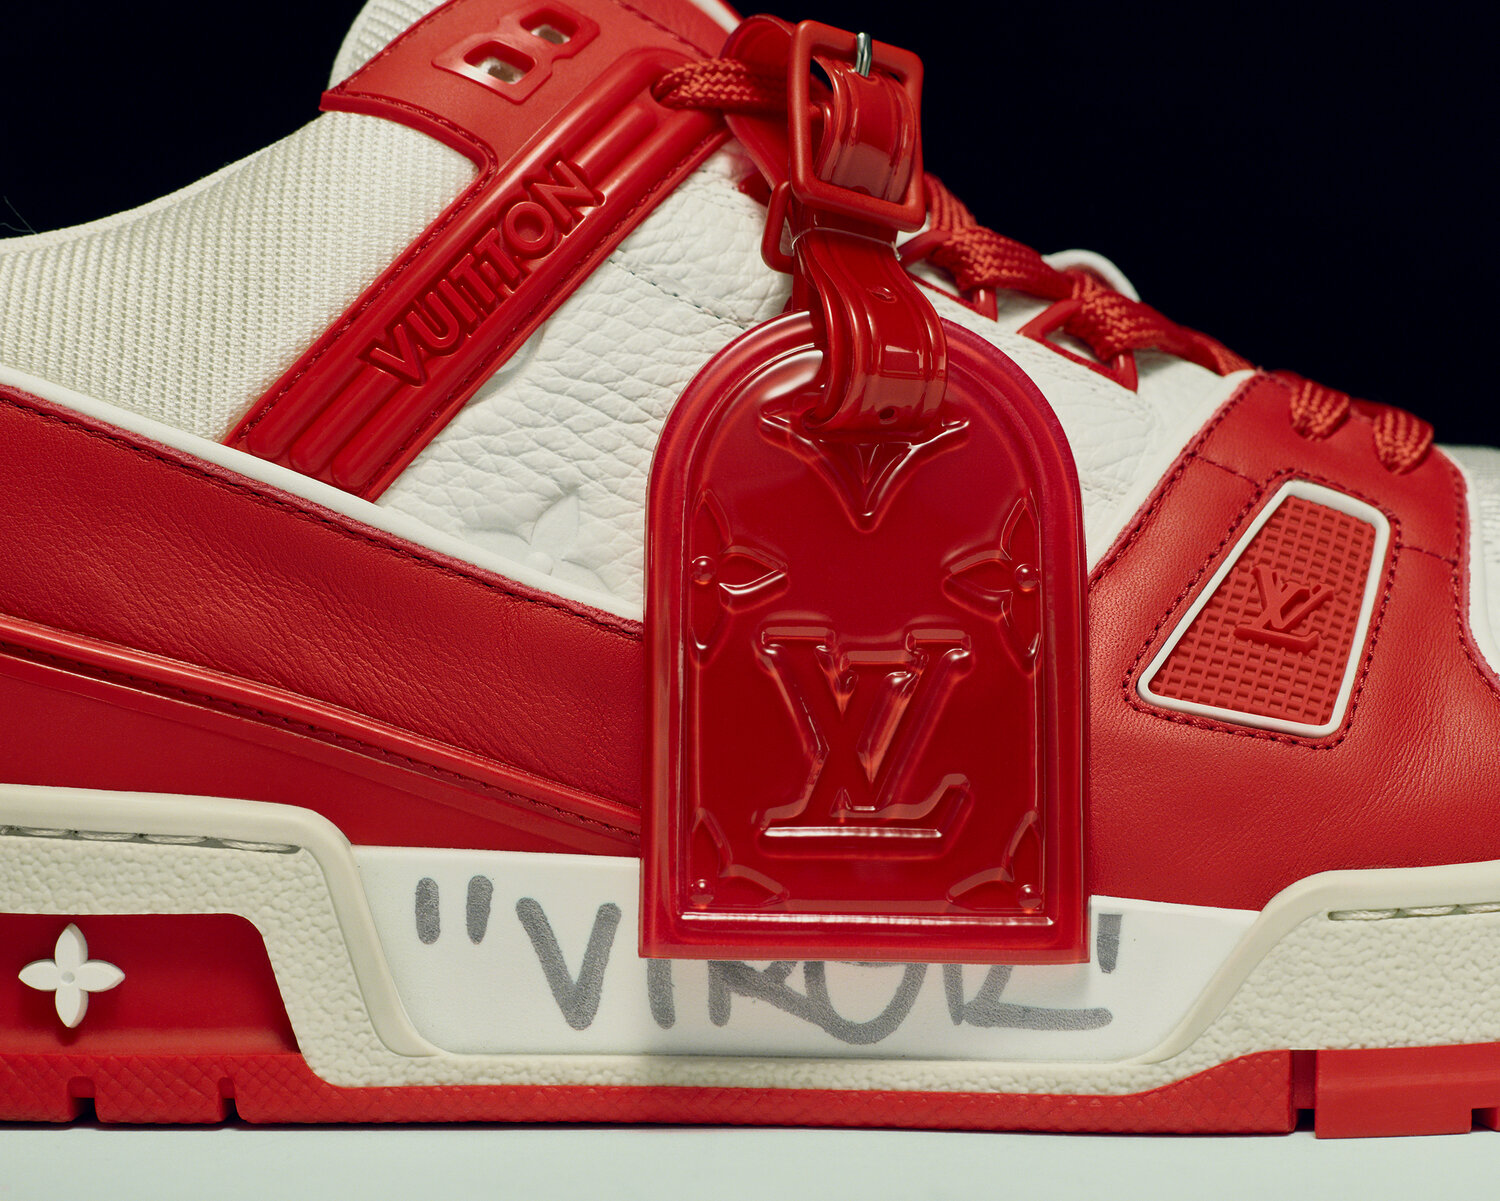 Sotheby's to Auction Virgil Abloh Sneaker Prototype for Louis Vuitton – WWD